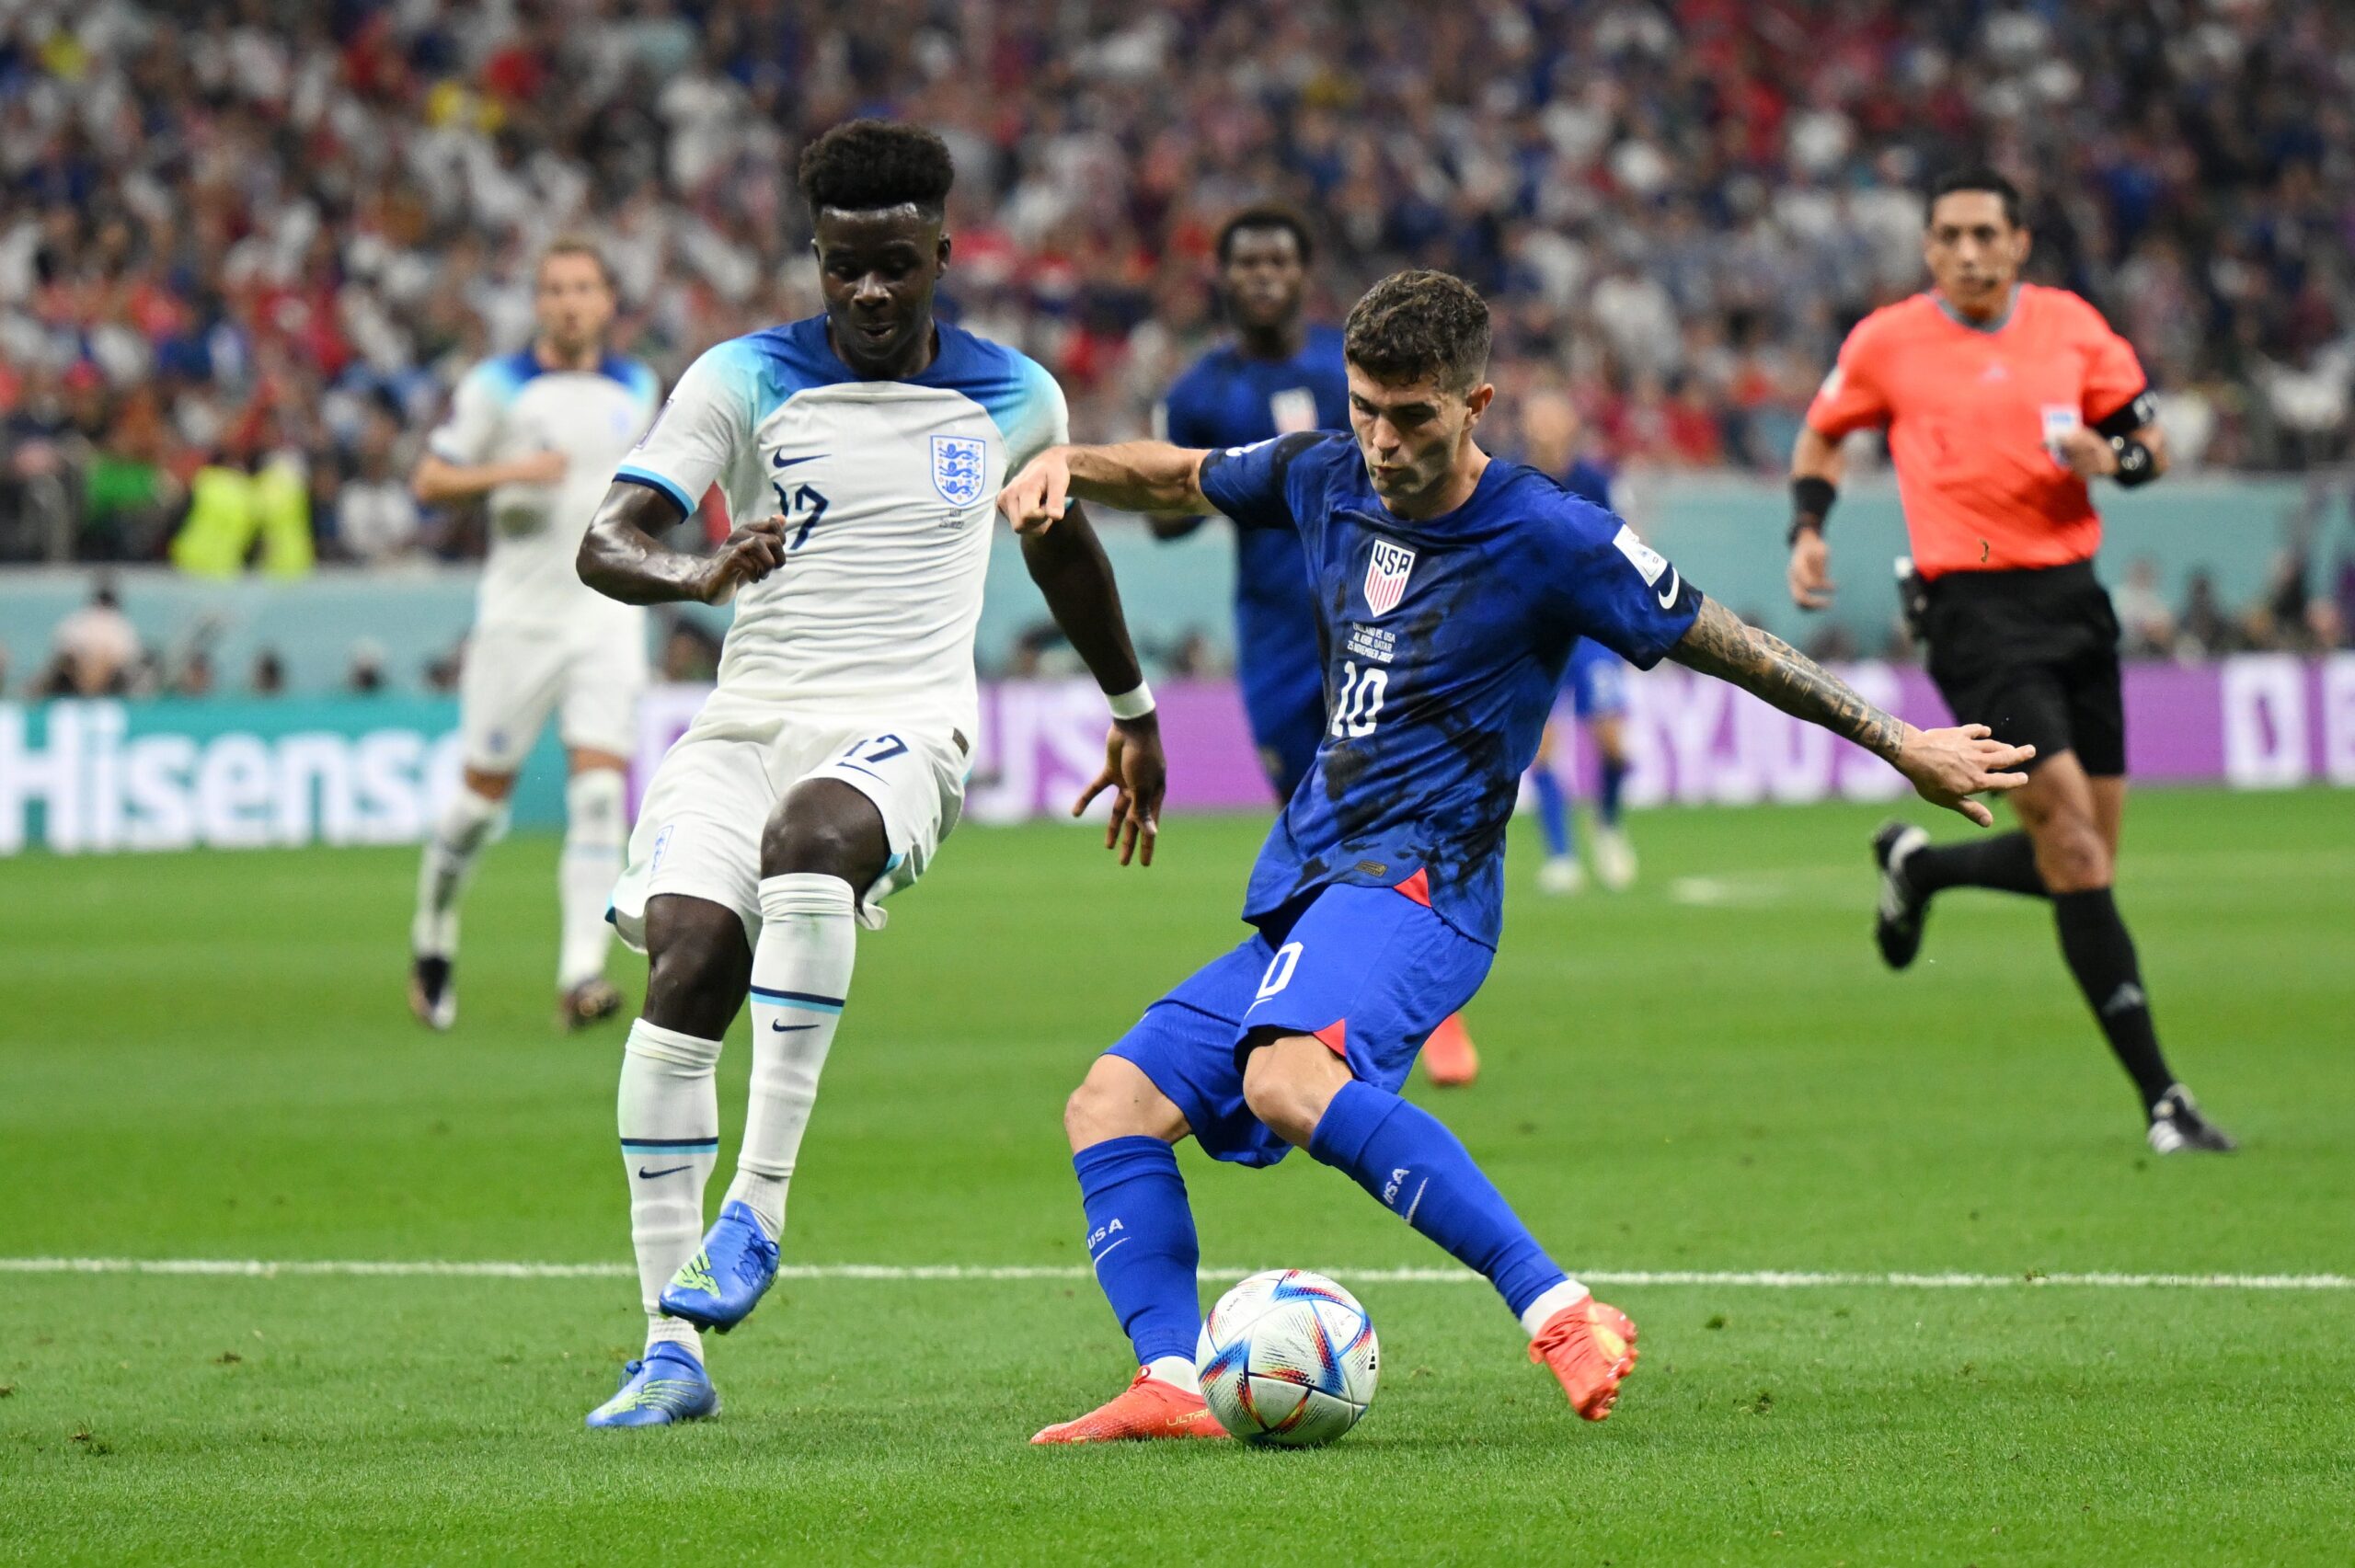 The battle between England and U.S.A. at the Al Bayt Stadium was far from the most entertaining thing seen in the Qatari World Cup so far